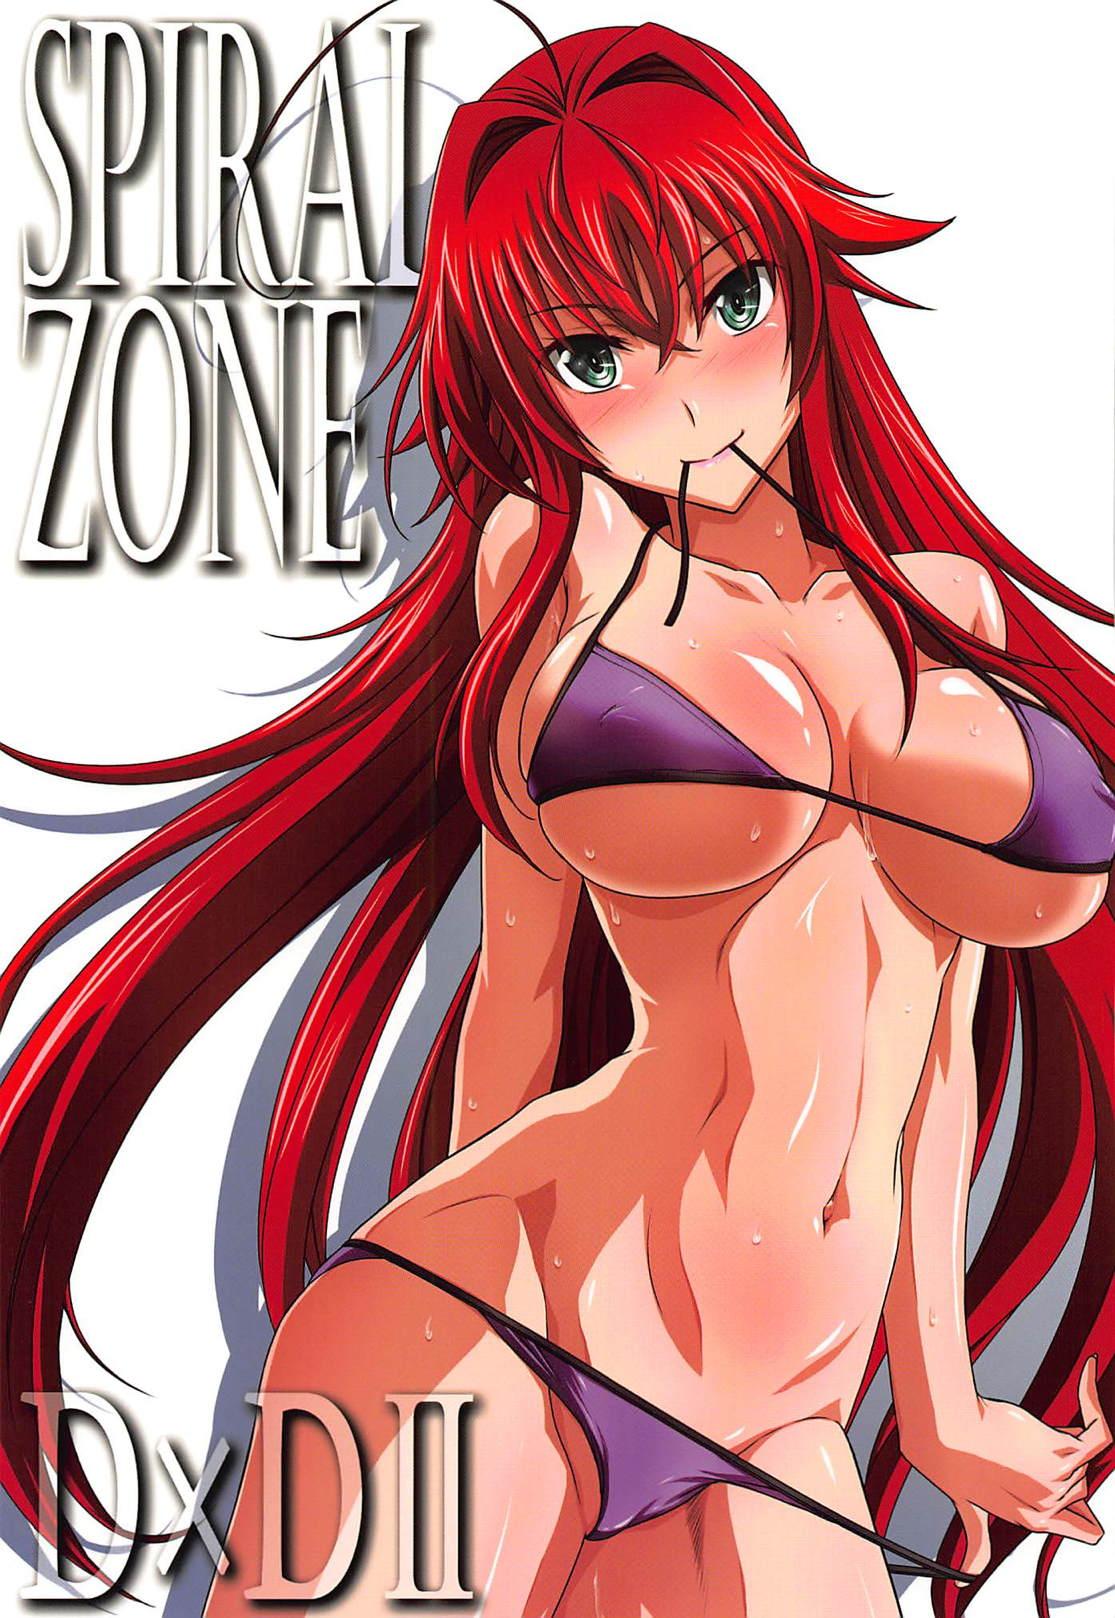 Fucked SPIRAL ZONE DxD II - Highschool dxd 8teen - Picture 1